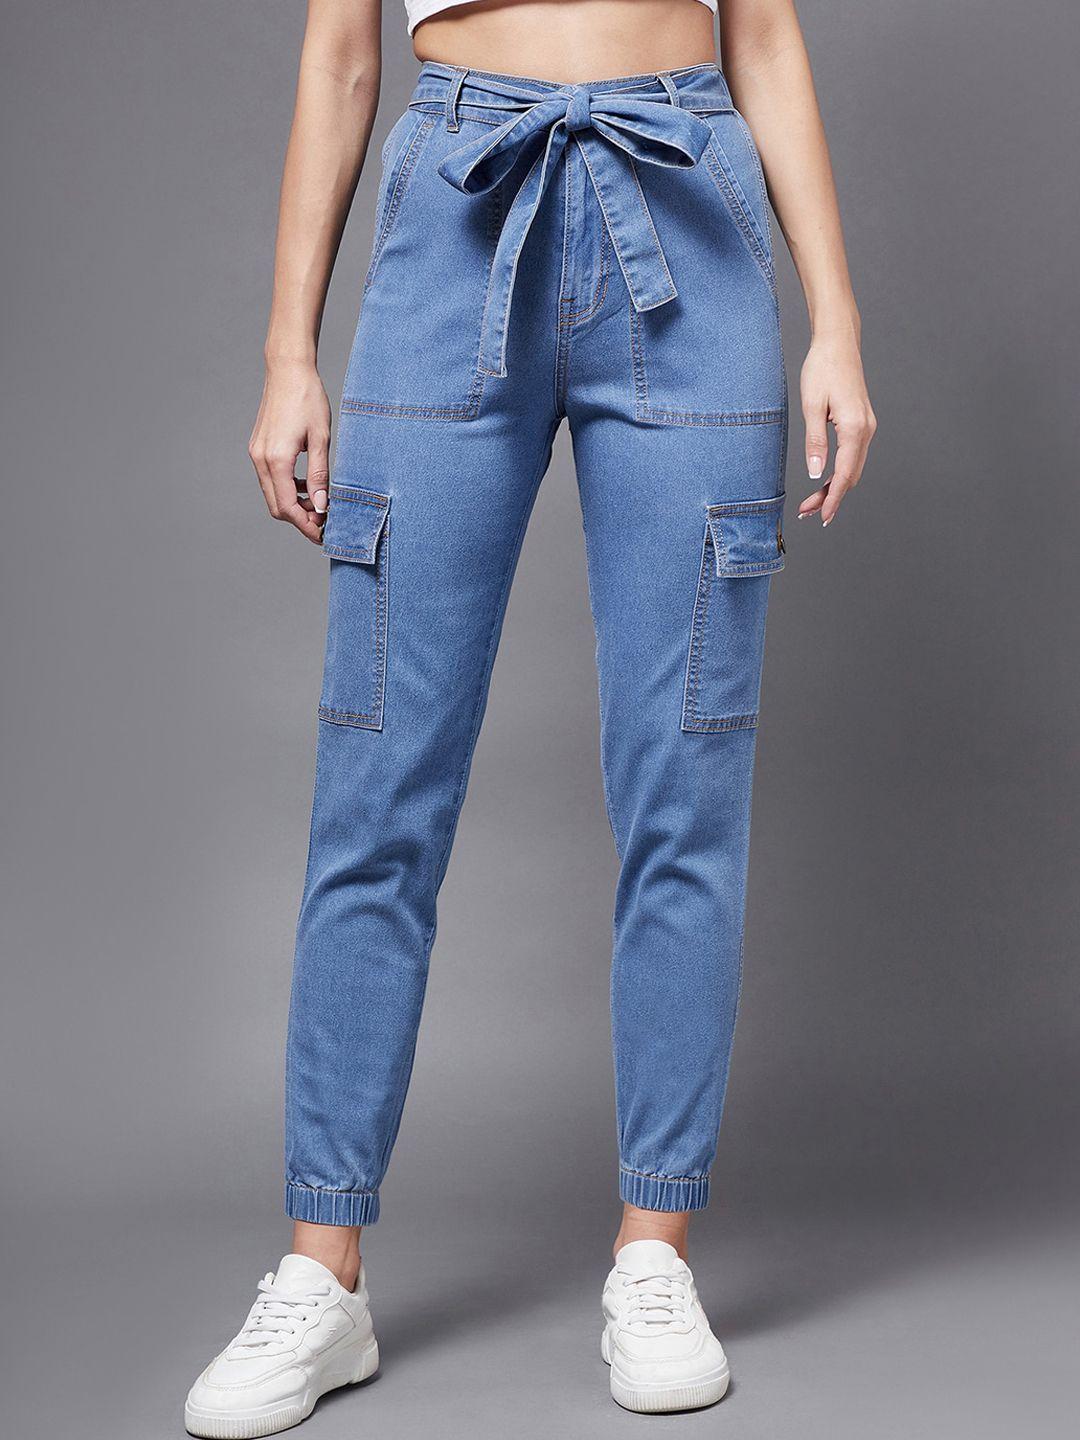 miss-chase-women-blue-jean-jogger-high-rise-light-fade-stretchable-joggers